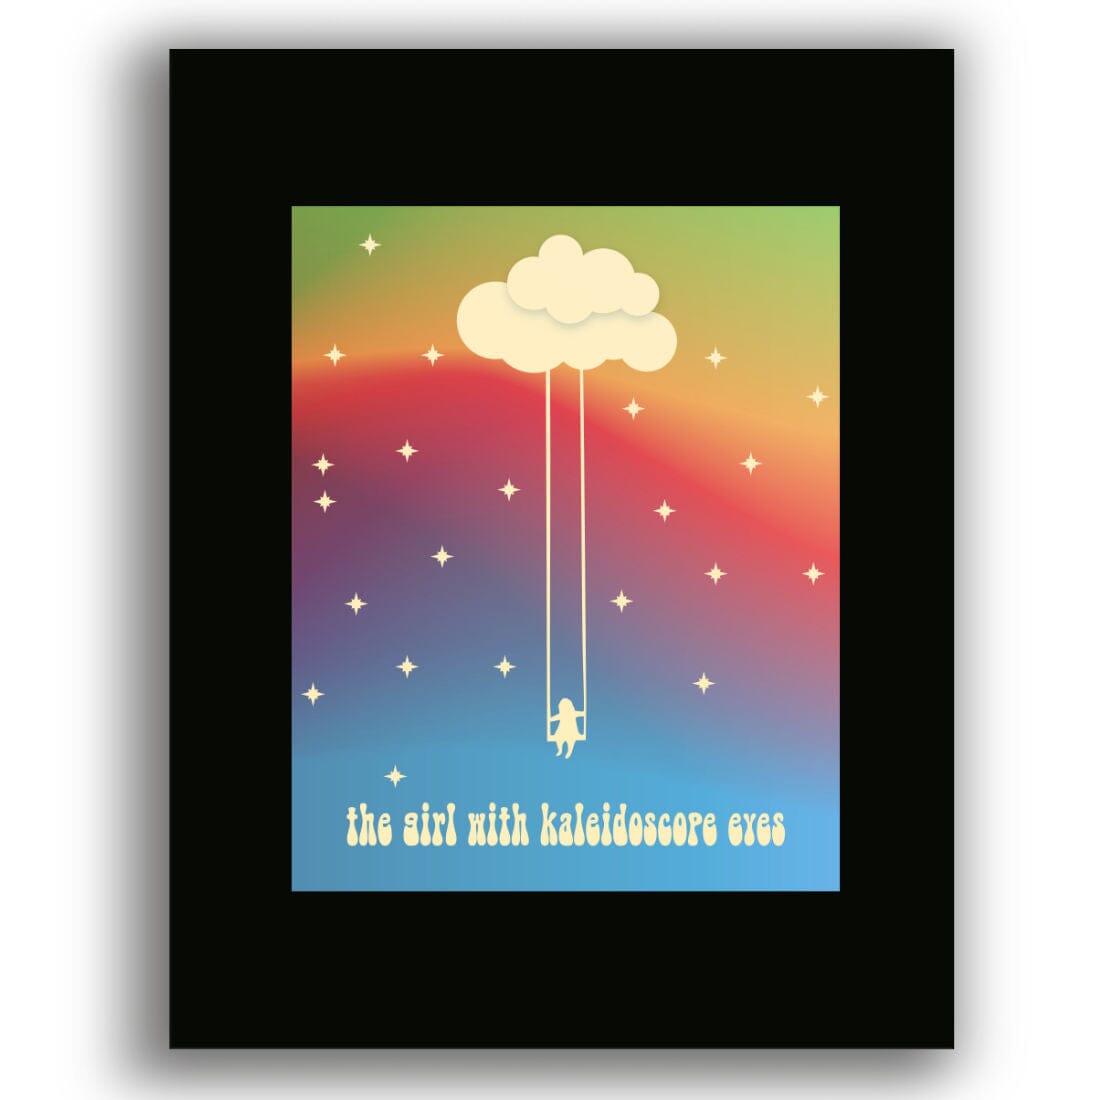 Lucy in the Sky with Diamonds by Beatles - Song Lyric Art Song Lyrics Art Song Lyrics Art 8x10 Black Matted Print 